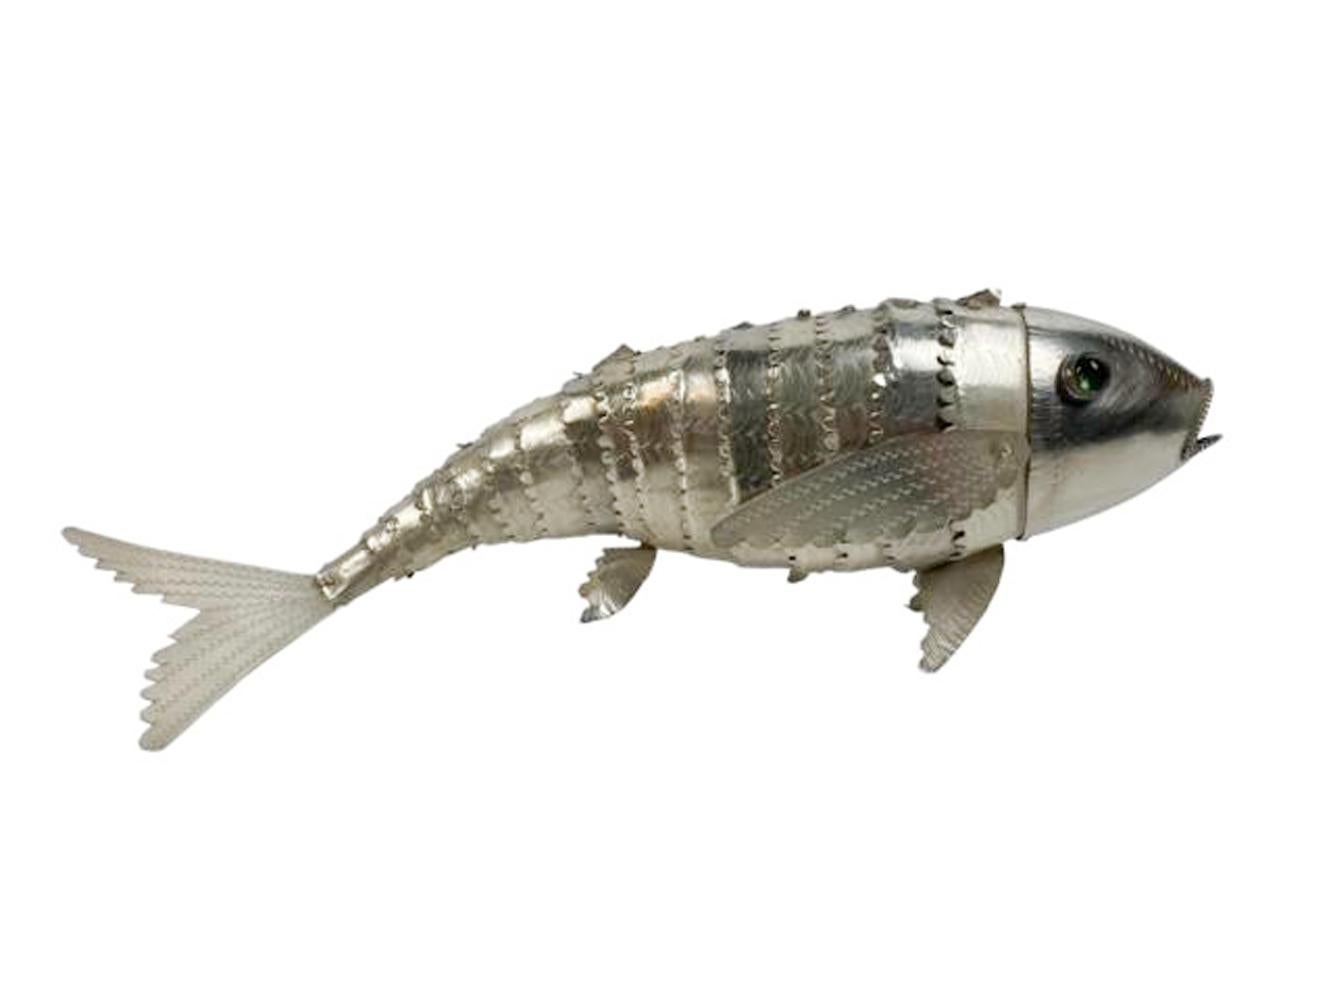 Mid 20th century silver plate articulated model of a fish with incised details and glass eyes.